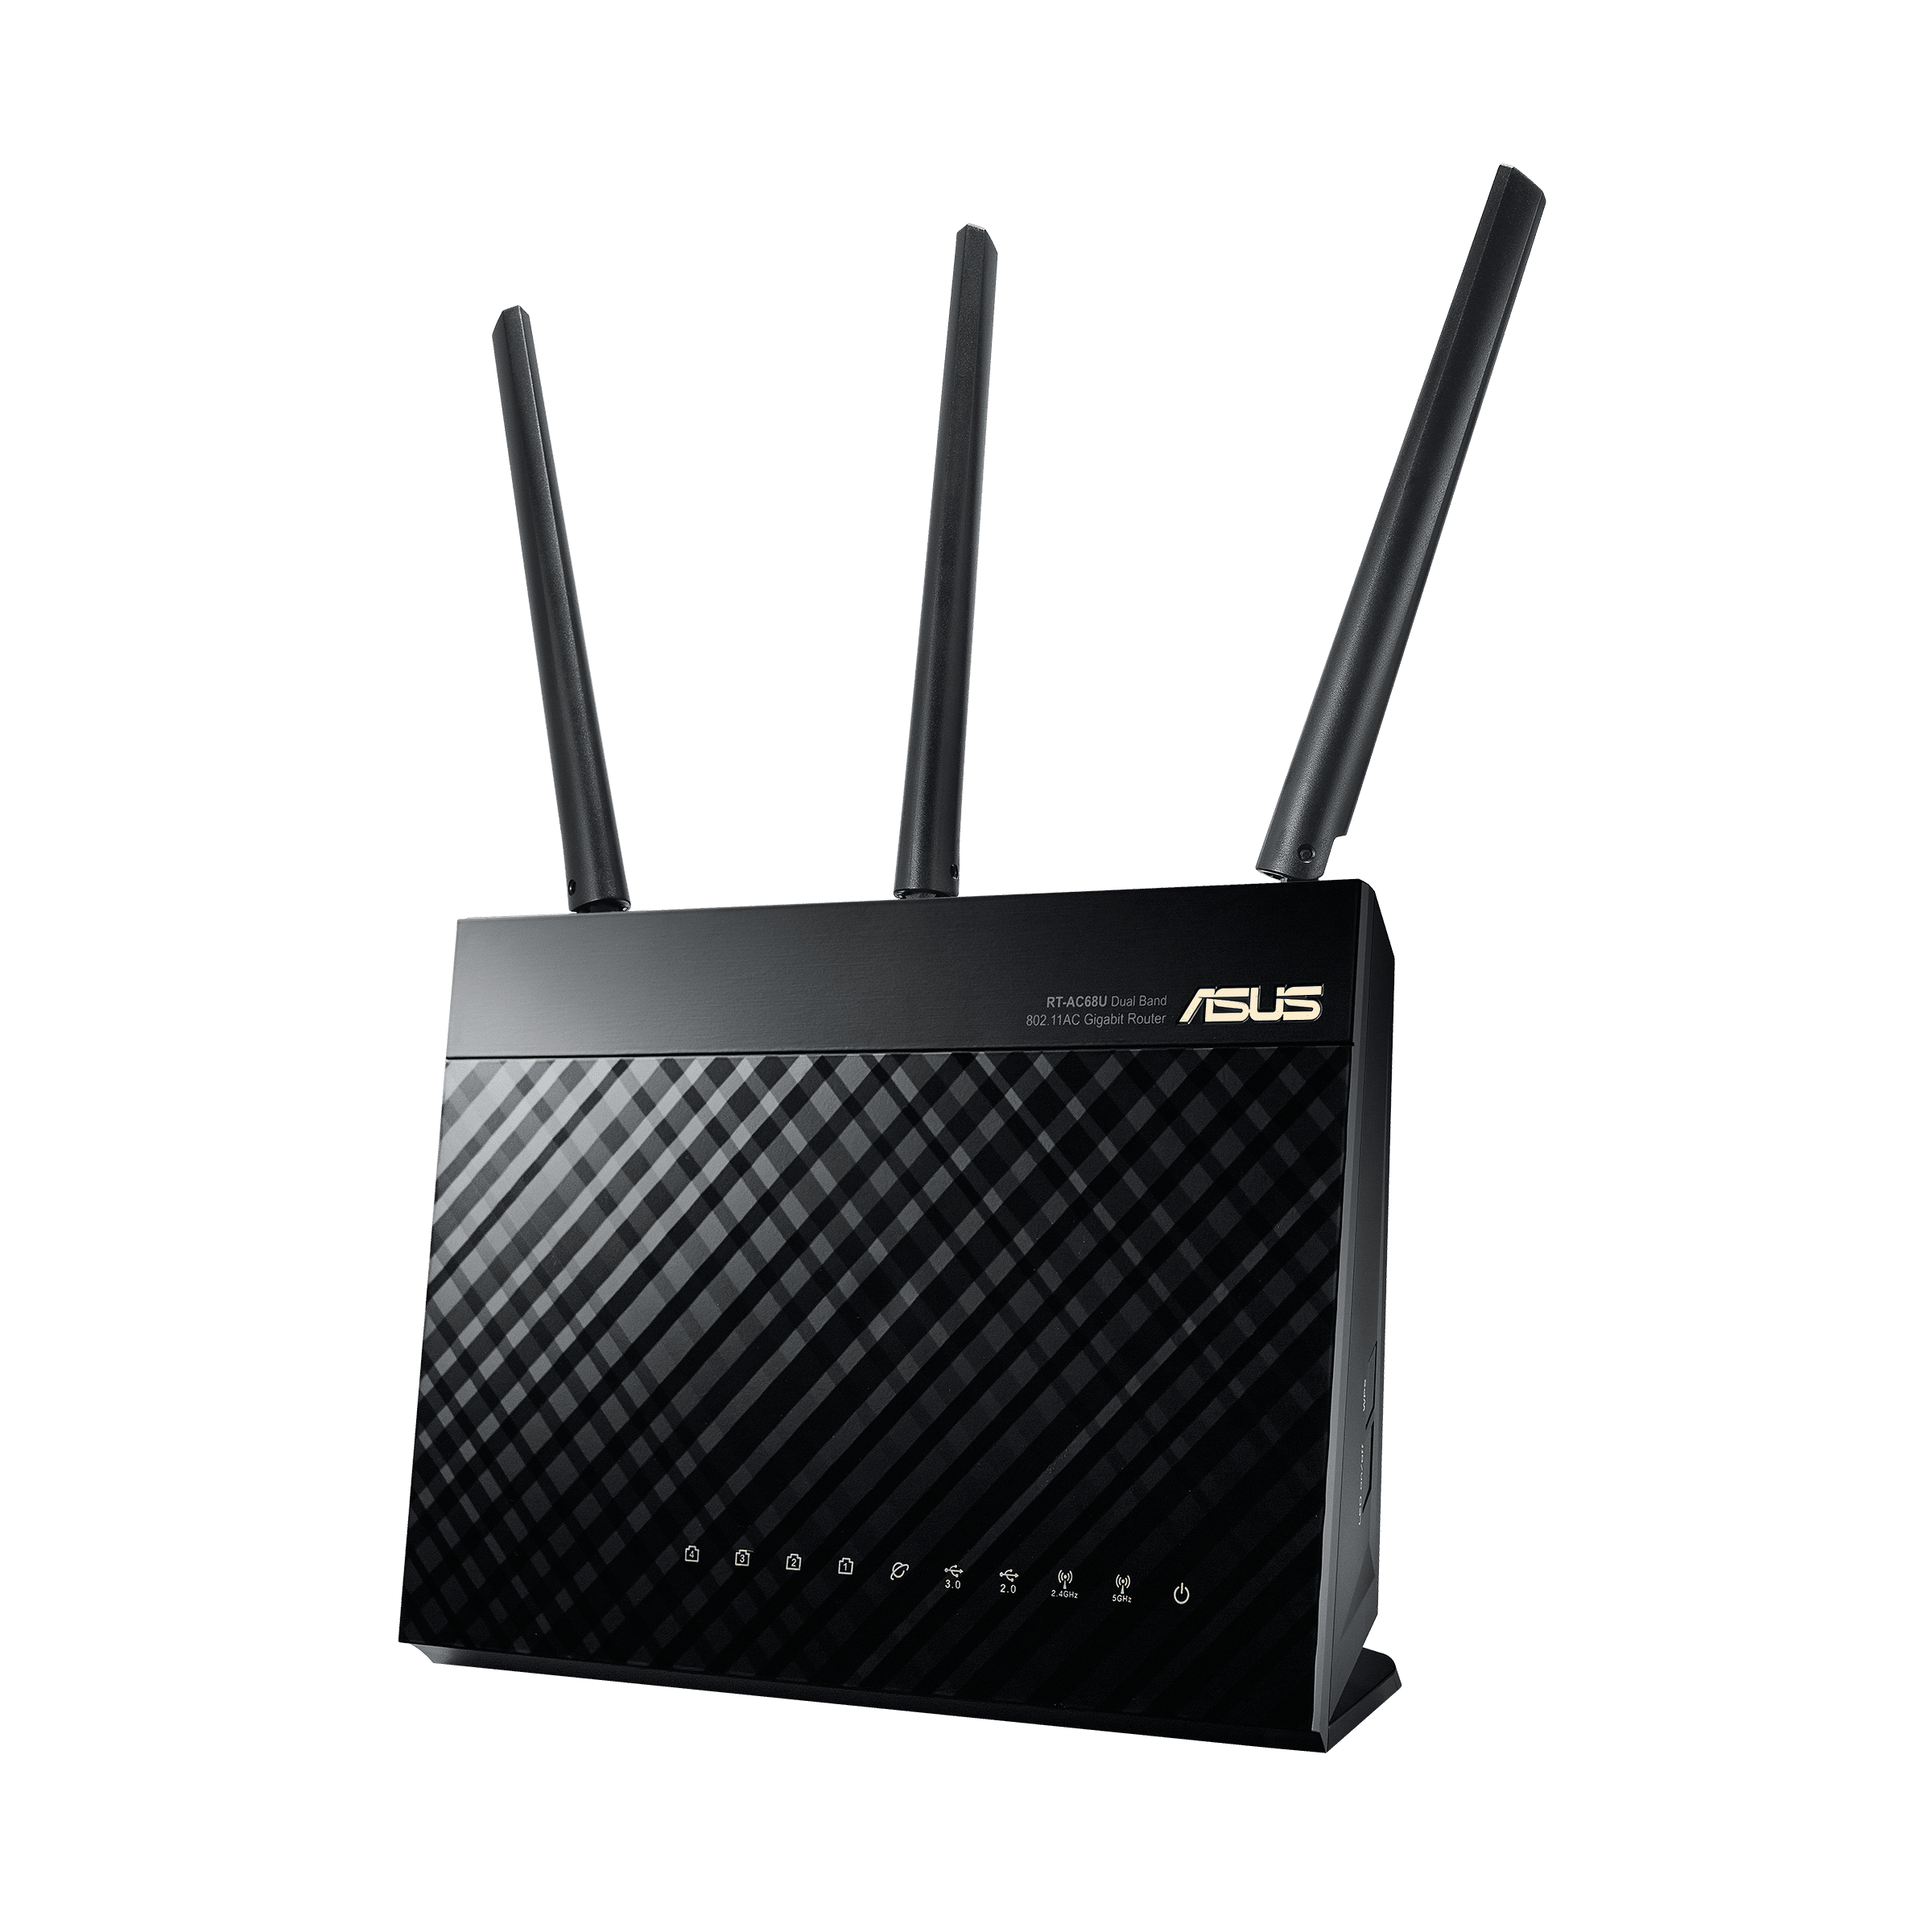 ASUS RP-AC68U dual-band AC1900 game repeater wifi wireless AP client 